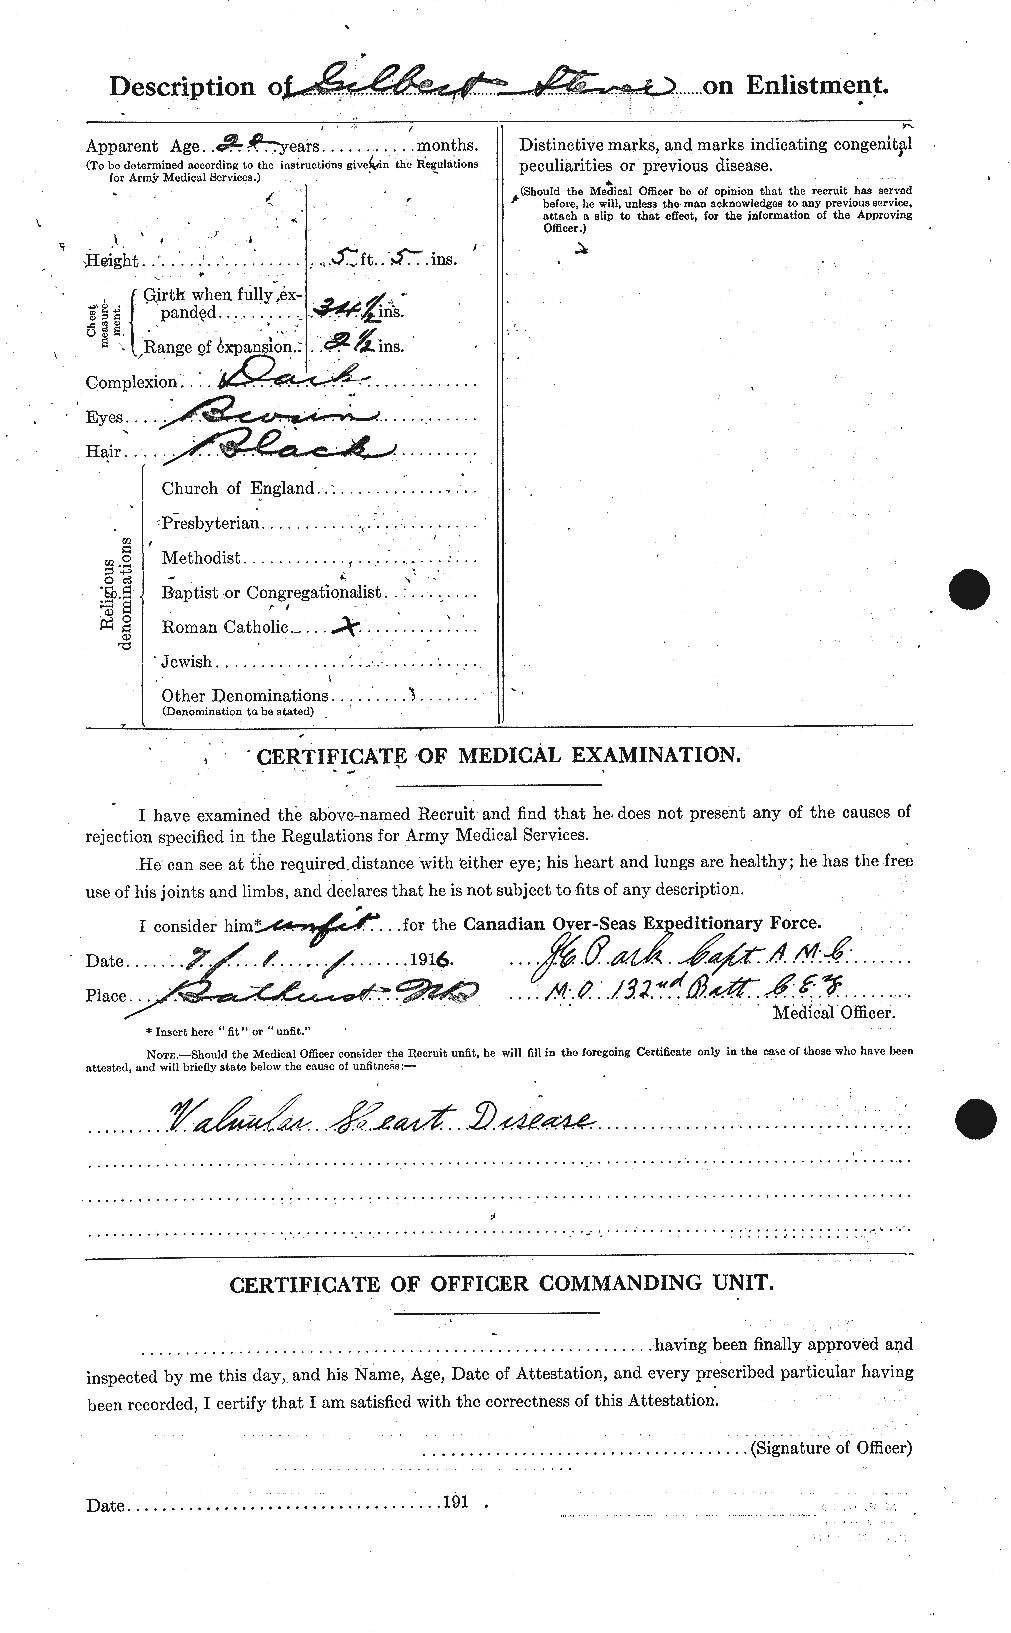 Personnel Records of the First World War - CEF 118762b